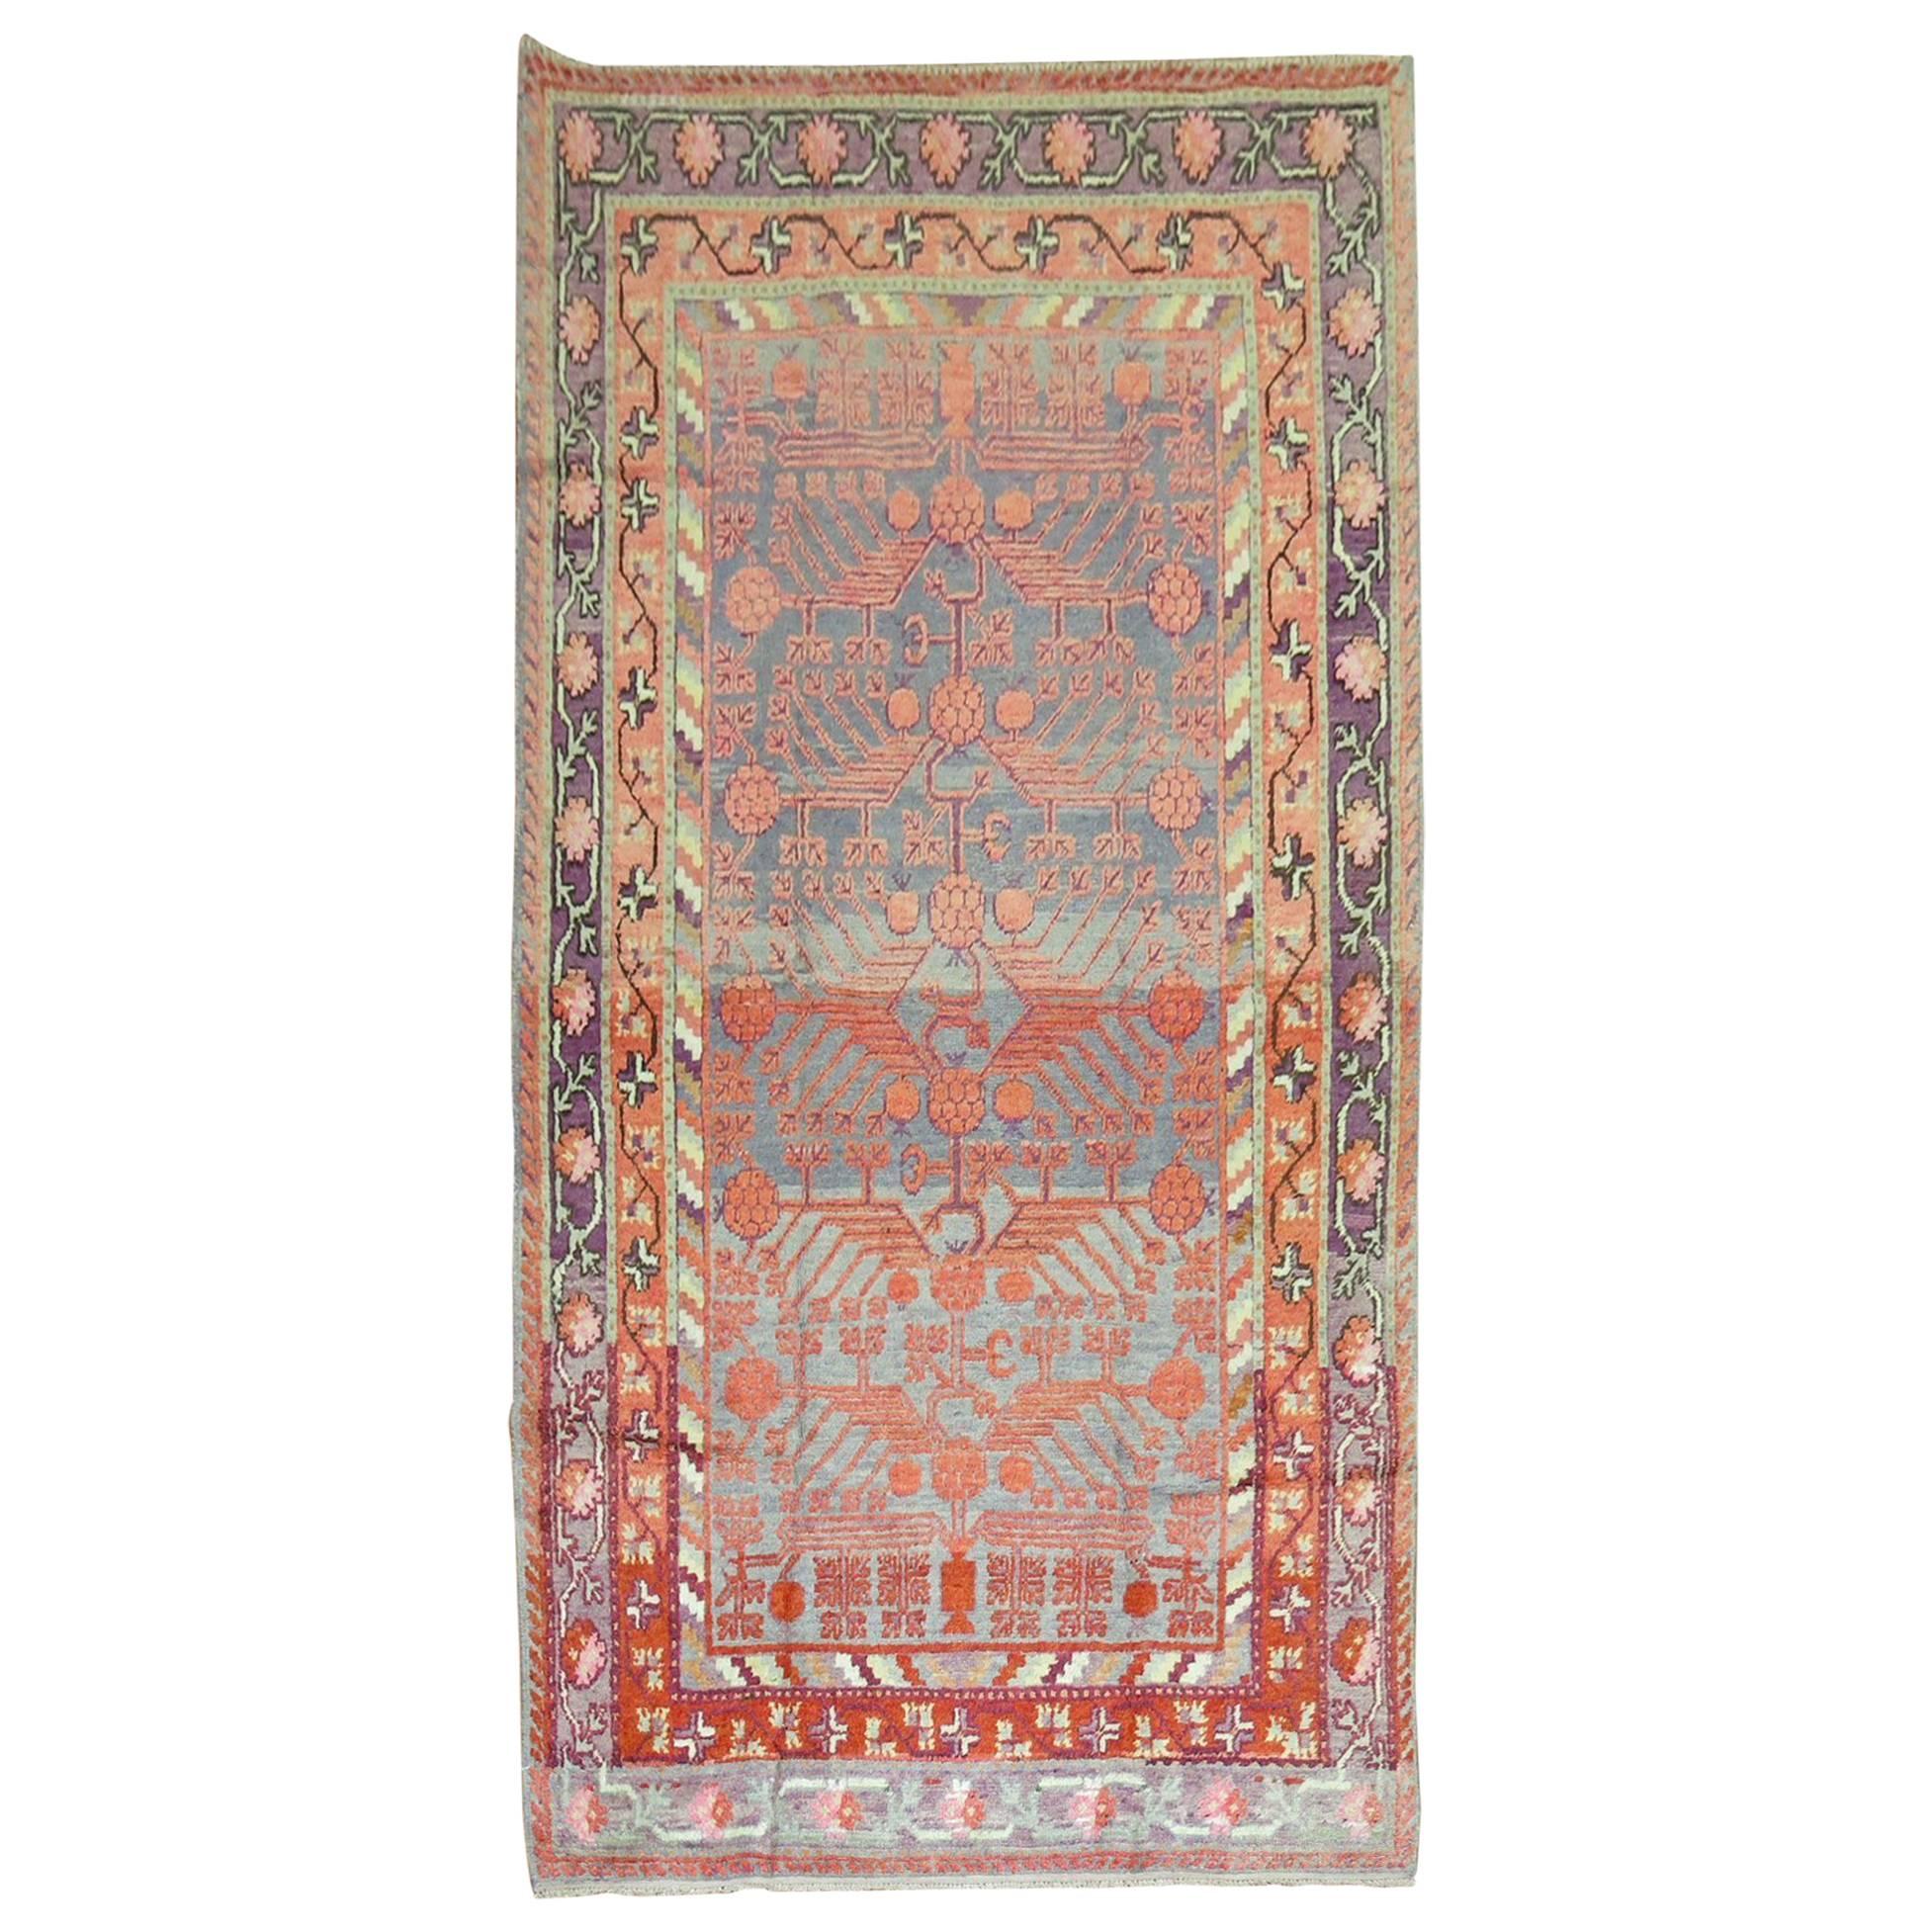 Early 20th Century Khotan Wool Gray Field Antique Pomegranate Rug For Sale